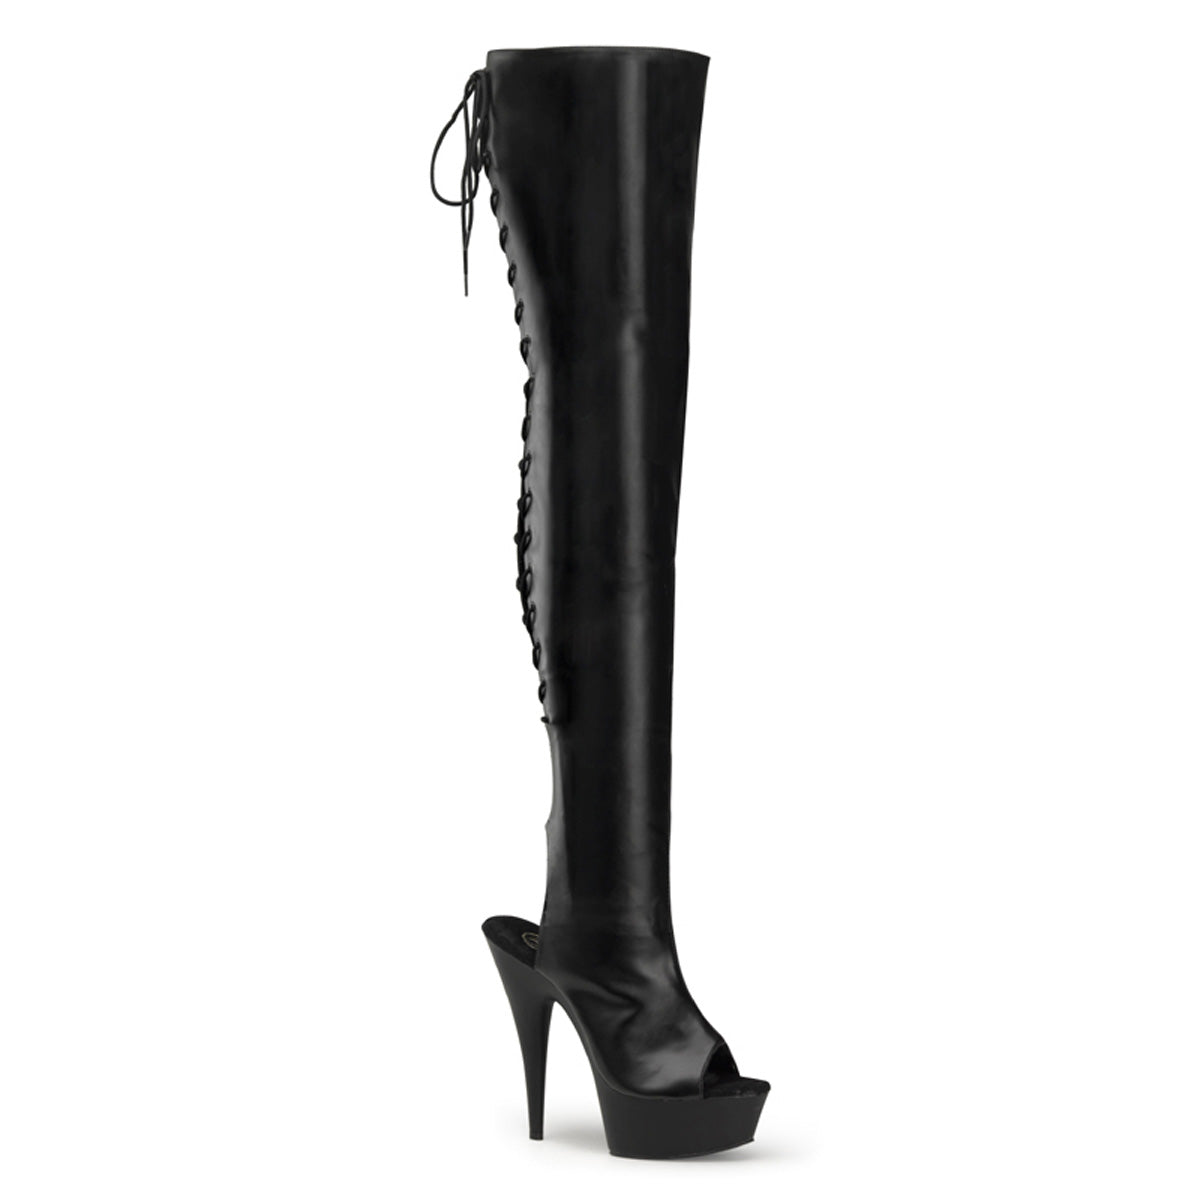 DELIGHT-3017 Black Thigh High Boots  Multi view 1